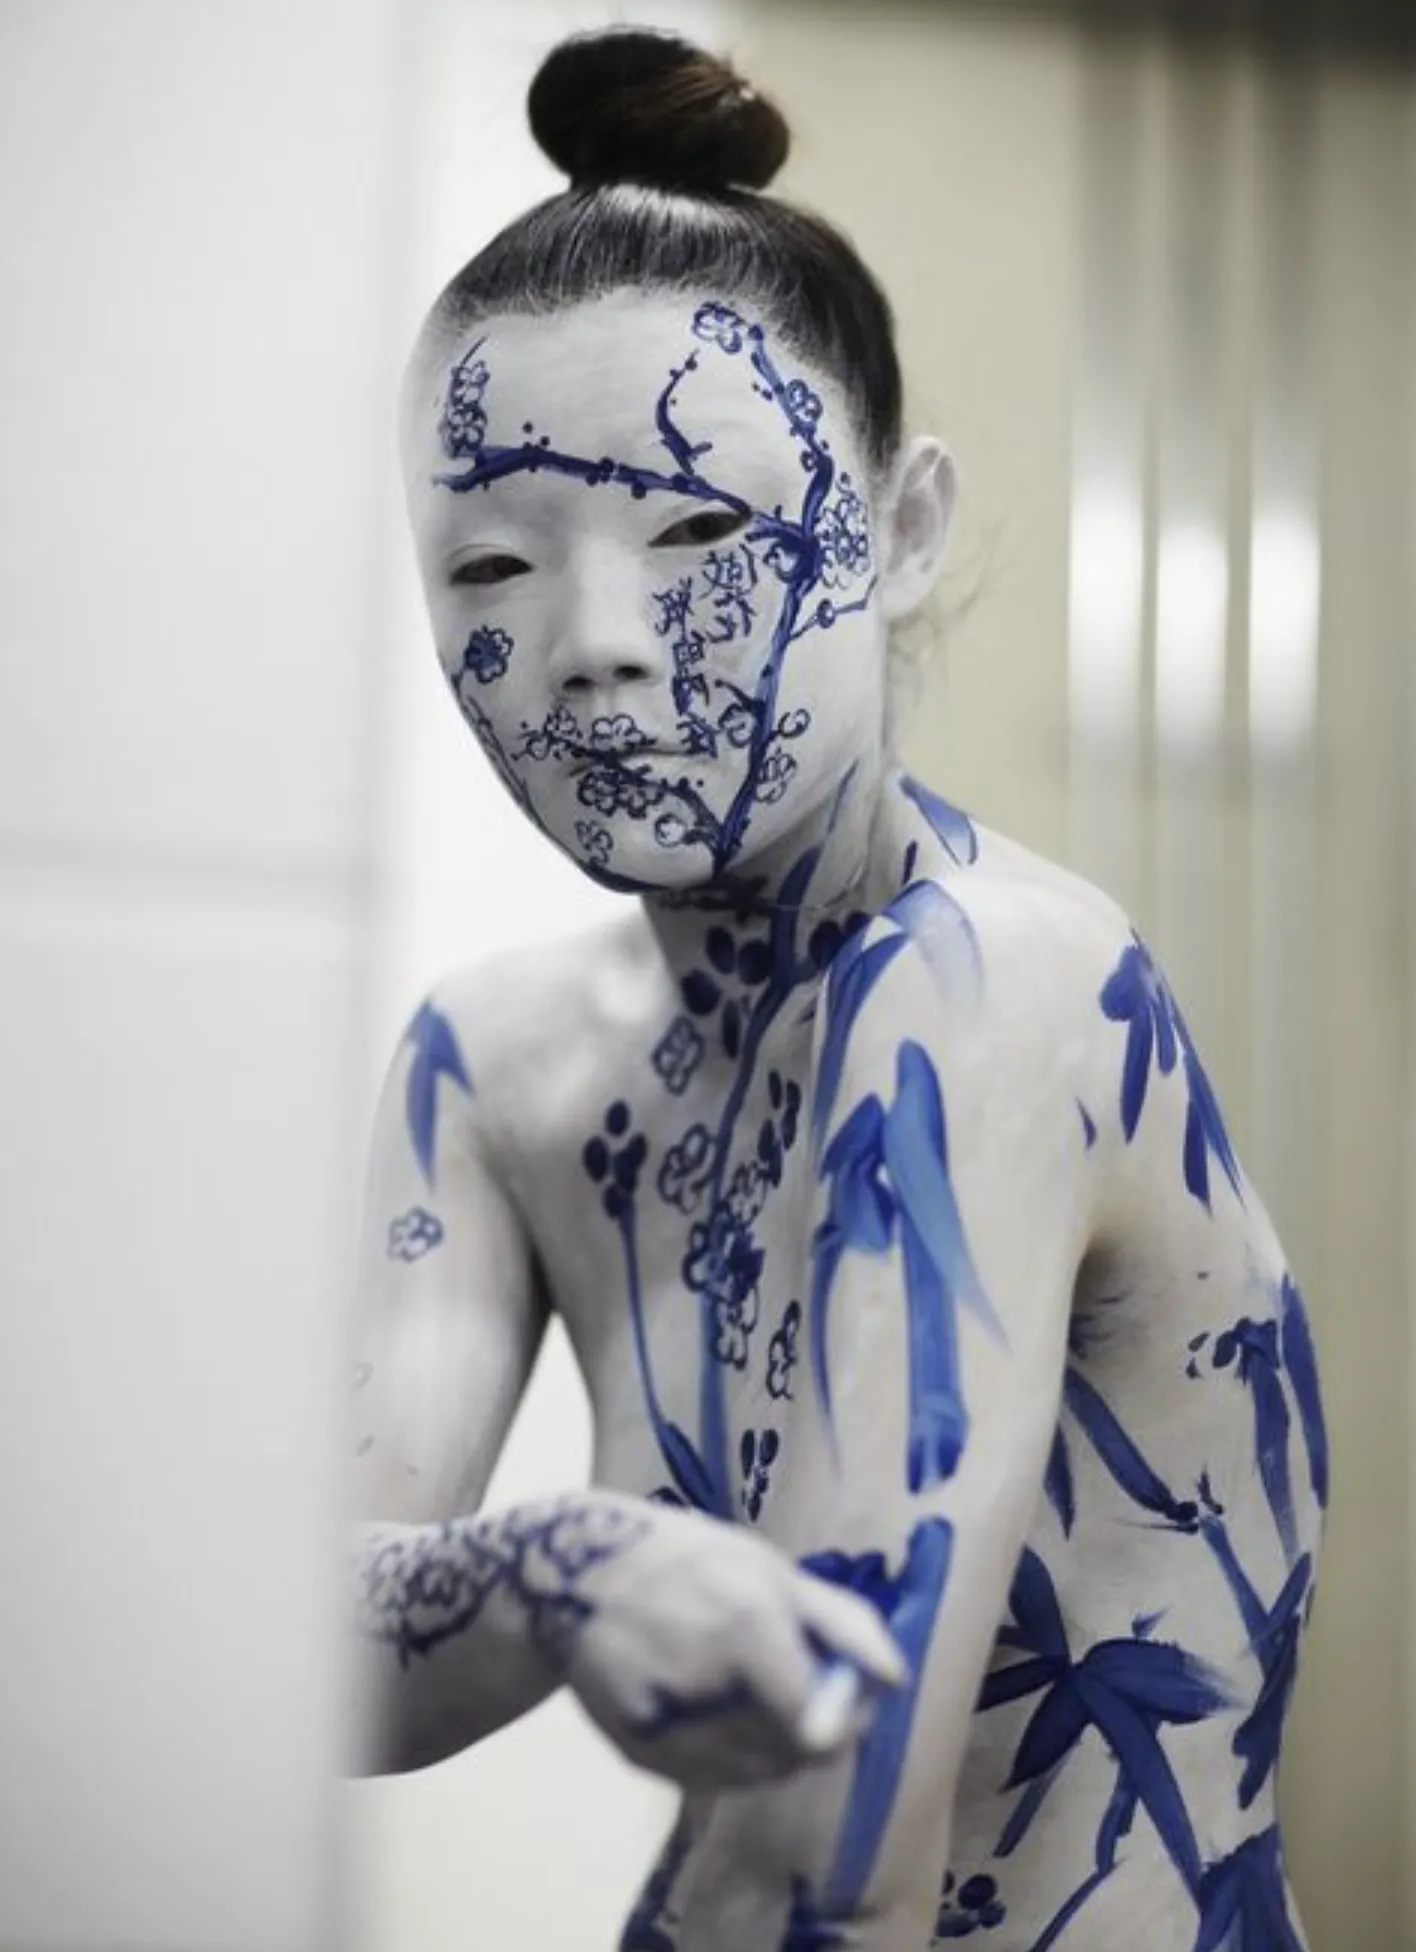 body paint inspired by tribes